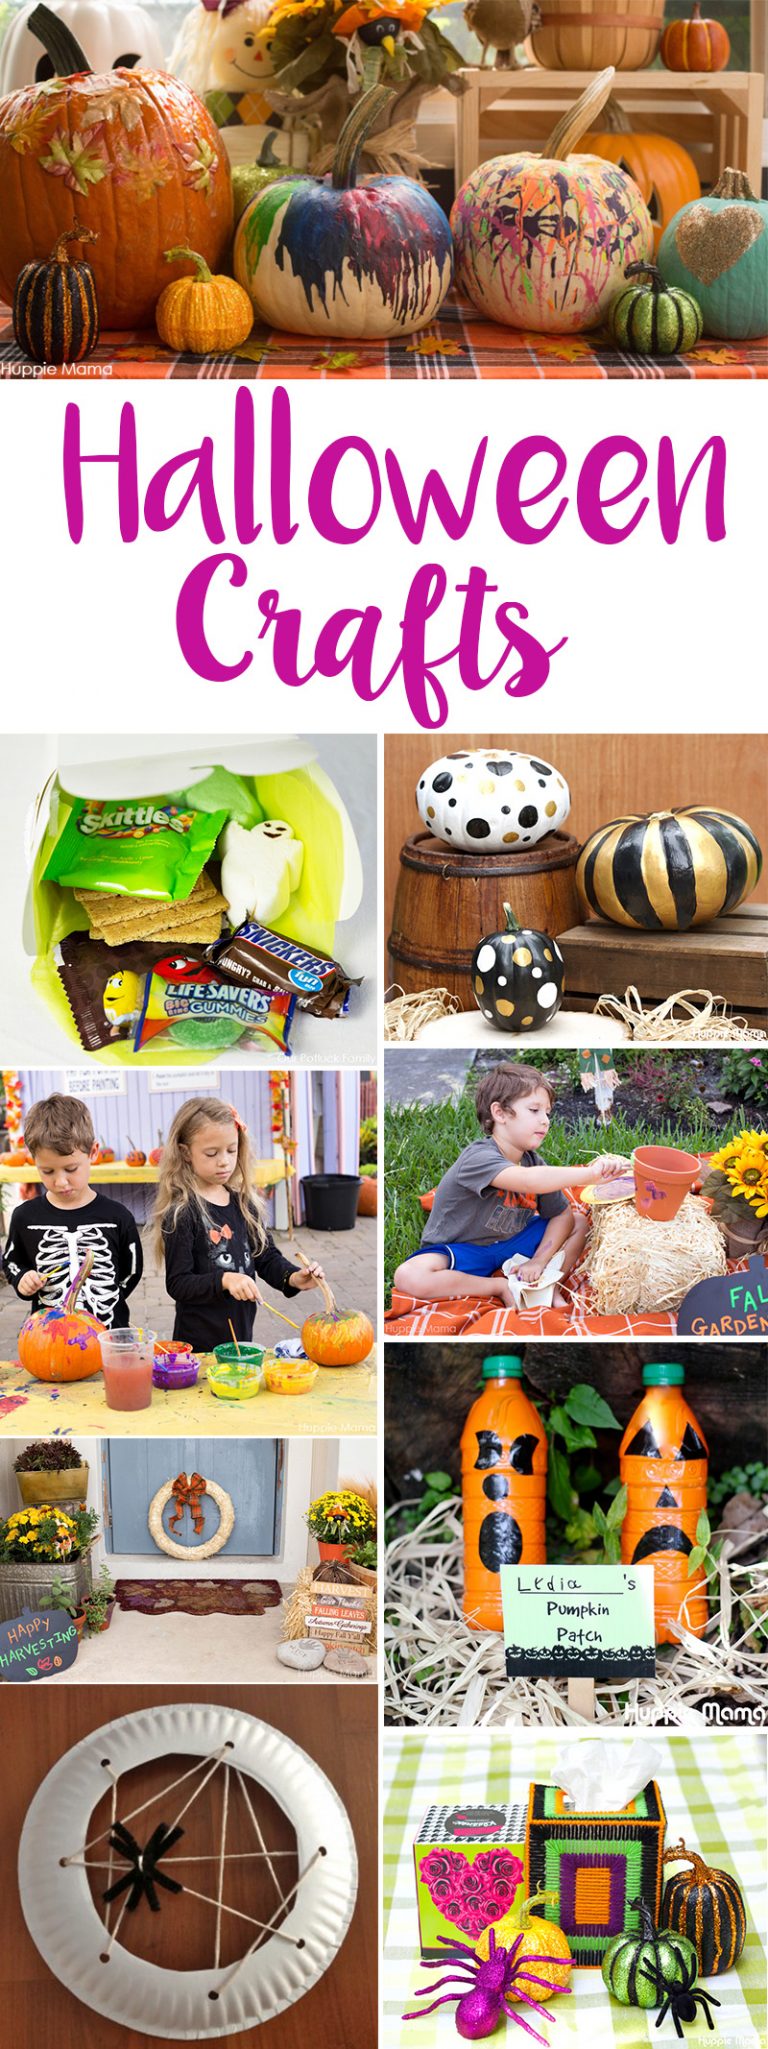 The Best Halloween Parties + Treats + Crafts - Our Potluck Family